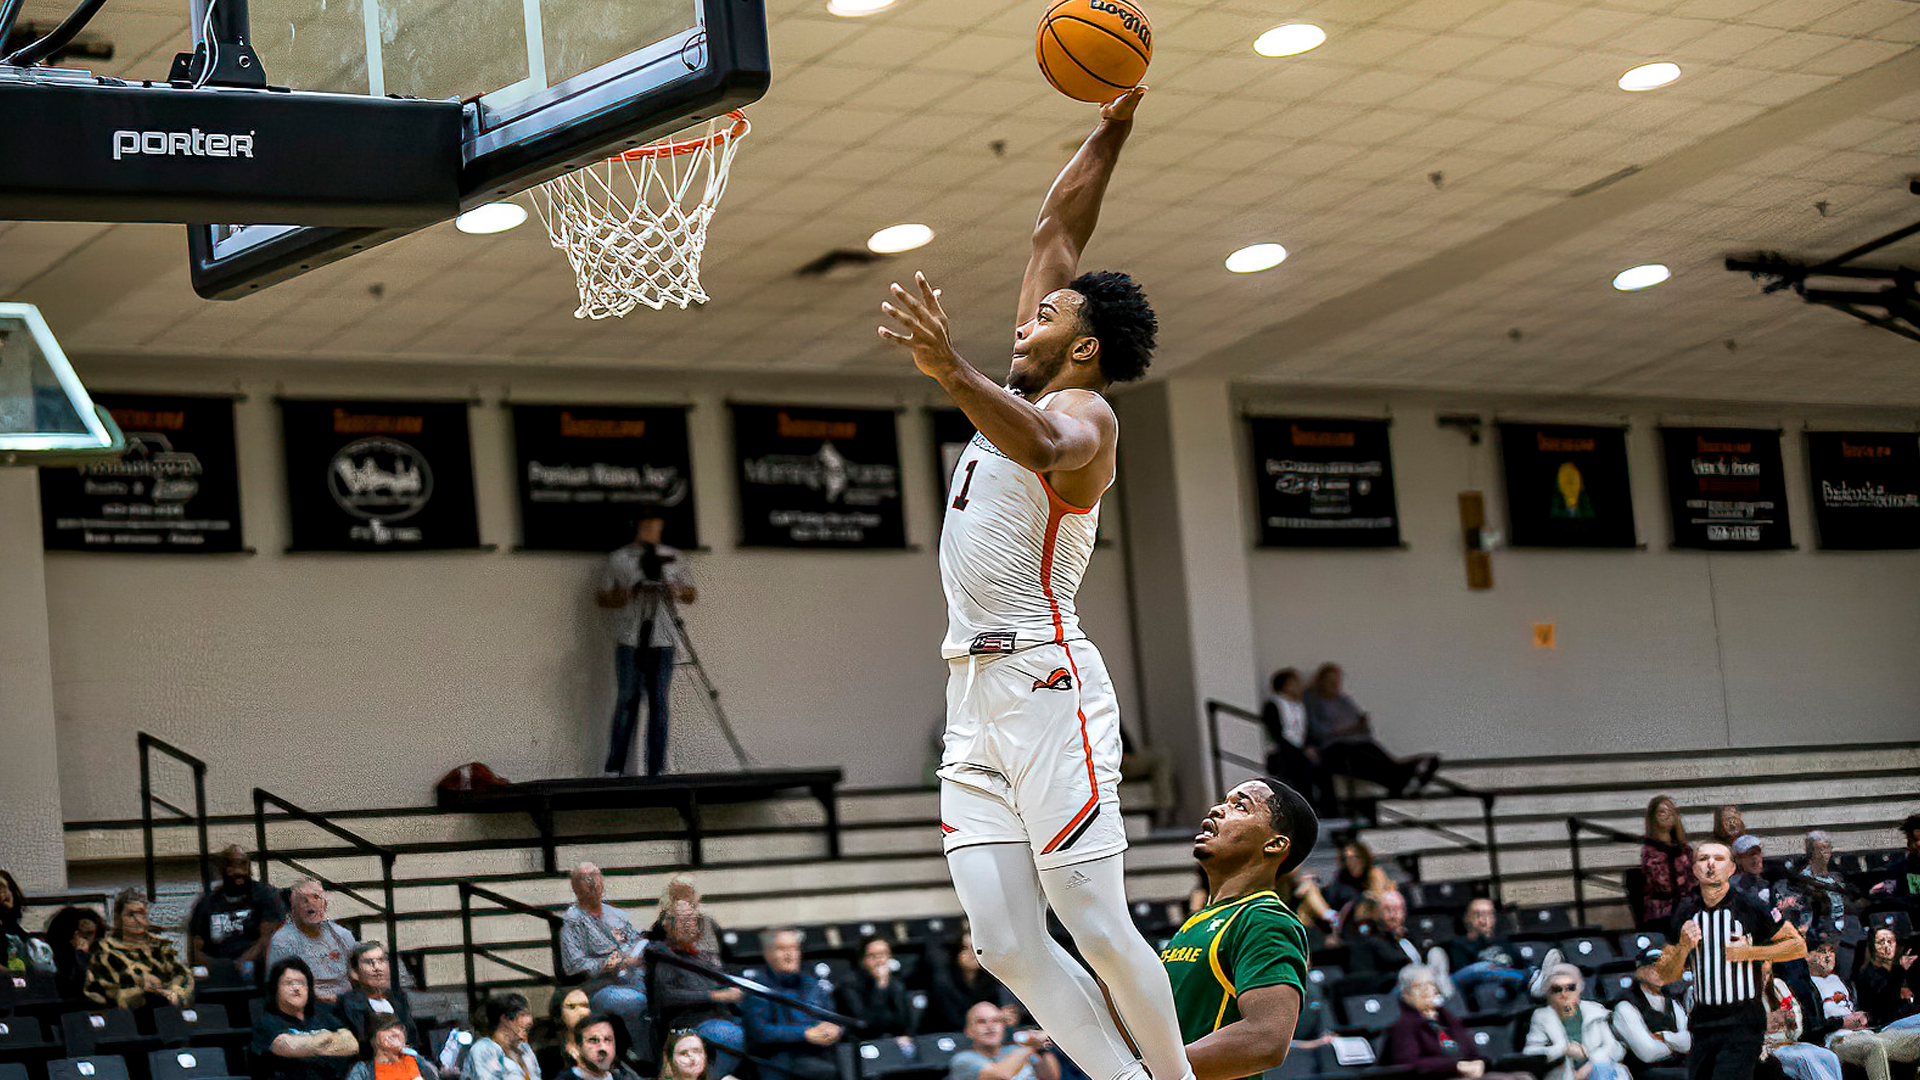 Justin Mitchell scored a season-high 18 points in Tusculum's 106-83 home win over Lees-McRae (photo by Chuck Williams)